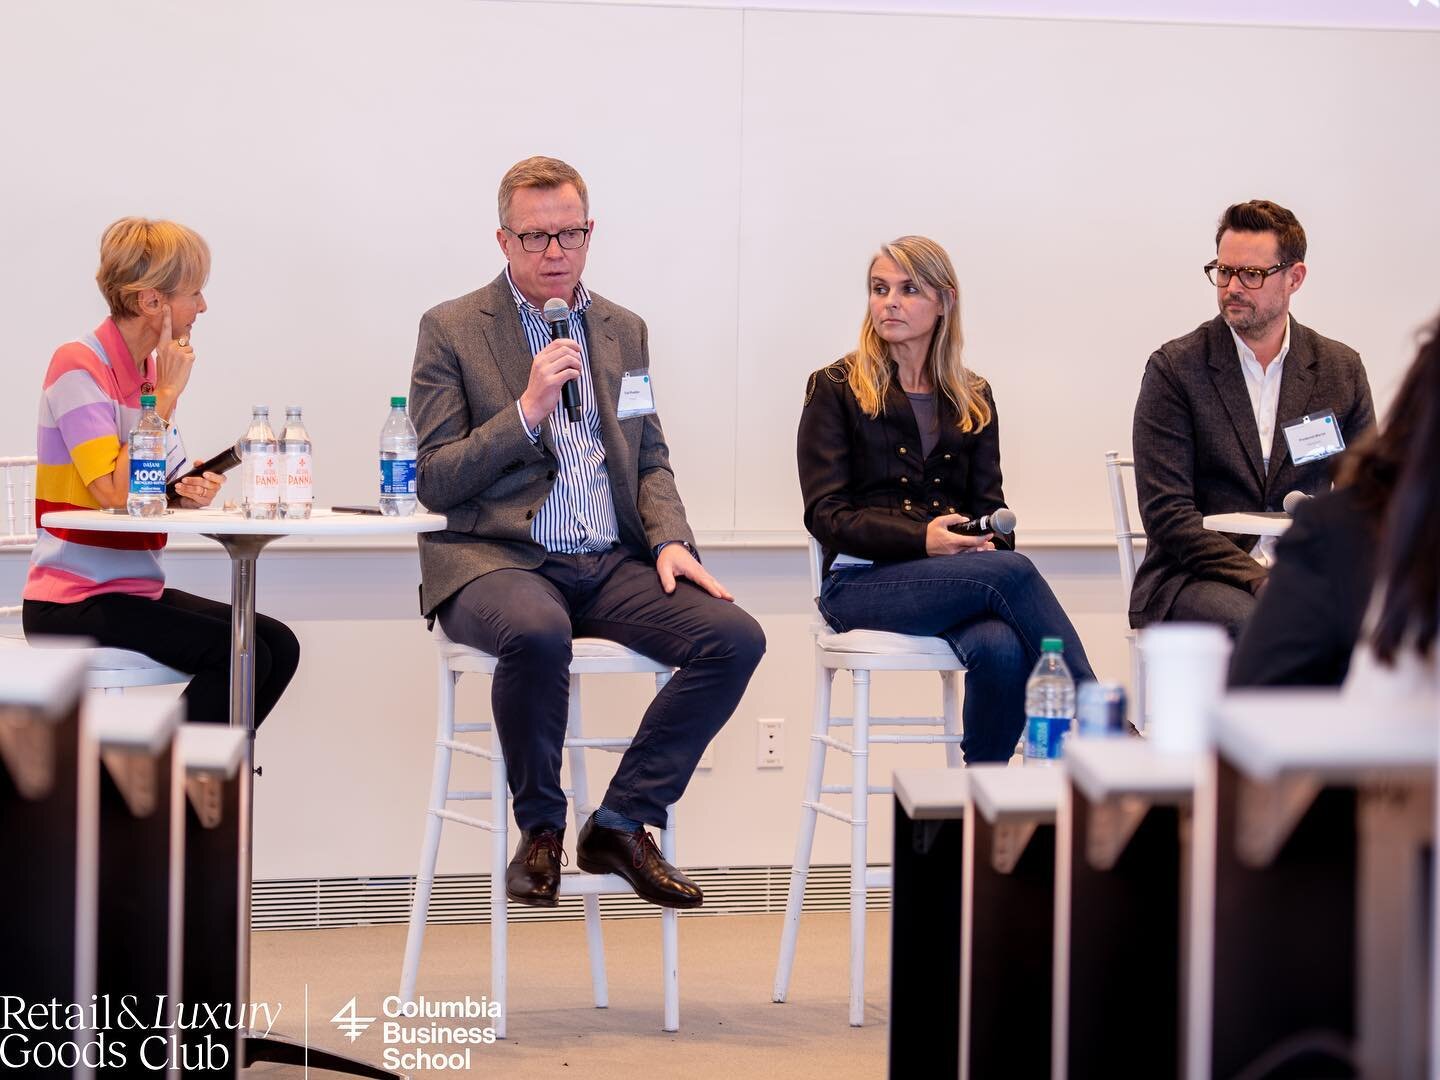 LEF hosted a wonderful panel discussion on sustainability at the 18th annual RLG conference. A big thank you to our speakers, Carl Poulter from @chanelofficial, Vanessa Clemendot from @lorealusa, and Fred Martel from @mycoworks, for sharing their tho